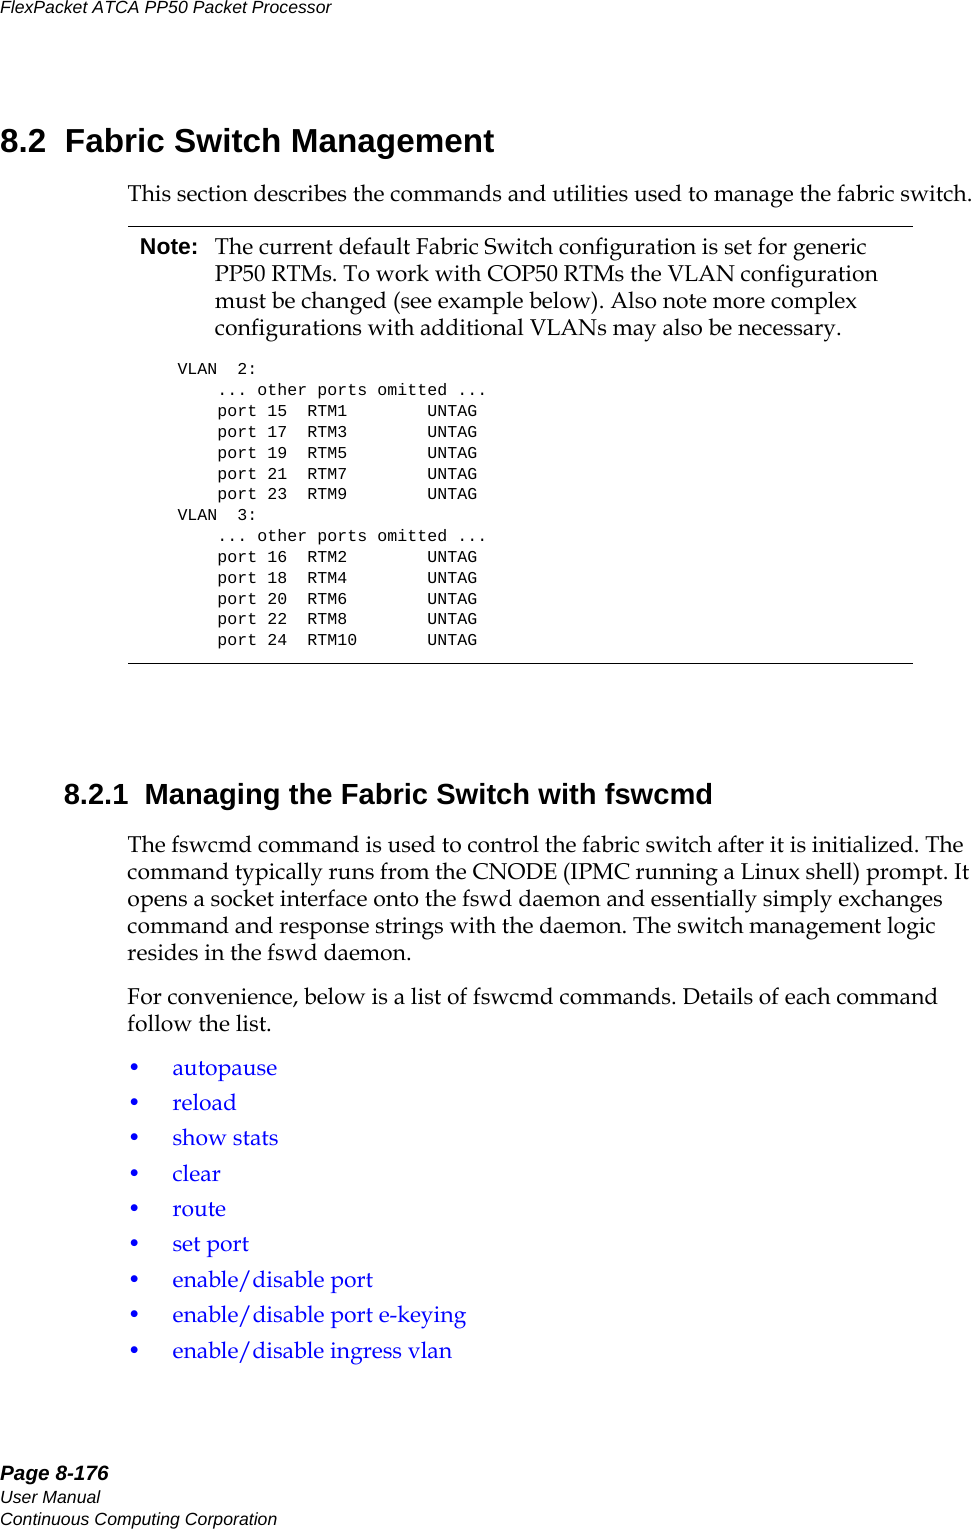 Page 8-176User ManualContinuous Computing CorporationFlexPacket ATCA PP50 Packet Processor     Preliminary8.2  Fabric Switch ManagementThis section describes the commands and utilities used to manage the fabric switch.8.2.1  Managing the Fabric Switch with fswcmdThe fswcmd command is used to control the fabric switch after it is initialized. The command typically runs from the CNODE (IPMC running a Linux shell) prompt. It opens a socket interface onto the fswd daemon and essentially simply exchanges command and response strings with the daemon. The switch management logic resides in the fswd daemon. For convenience, below is a list of fswcmd commands. Details of each command follow the list. •autopause•reload•show stats•clear•route•set port• enable/disable port• enable/disable port e-keying• enable/disable ingress vlanNote: The current default Fabric Switch configuration is set for generic PP50 RTMs. To work with COP50 RTMs the VLAN configuration must be changed (see example below). Also note more complex configurations with additional VLANs may also be necessary. VLAN  2:    ... other ports omitted ...    port 15  RTM1        UNTAG    port 17  RTM3        UNTAG    port 19  RTM5        UNTAG    port 21  RTM7        UNTAG    port 23  RTM9        UNTAGVLAN  3:    ... other ports omitted ...    port 16  RTM2        UNTAG    port 18  RTM4        UNTAG    port 20  RTM6        UNTAG    port 22  RTM8        UNTAG    port 24  RTM10       UNTAG